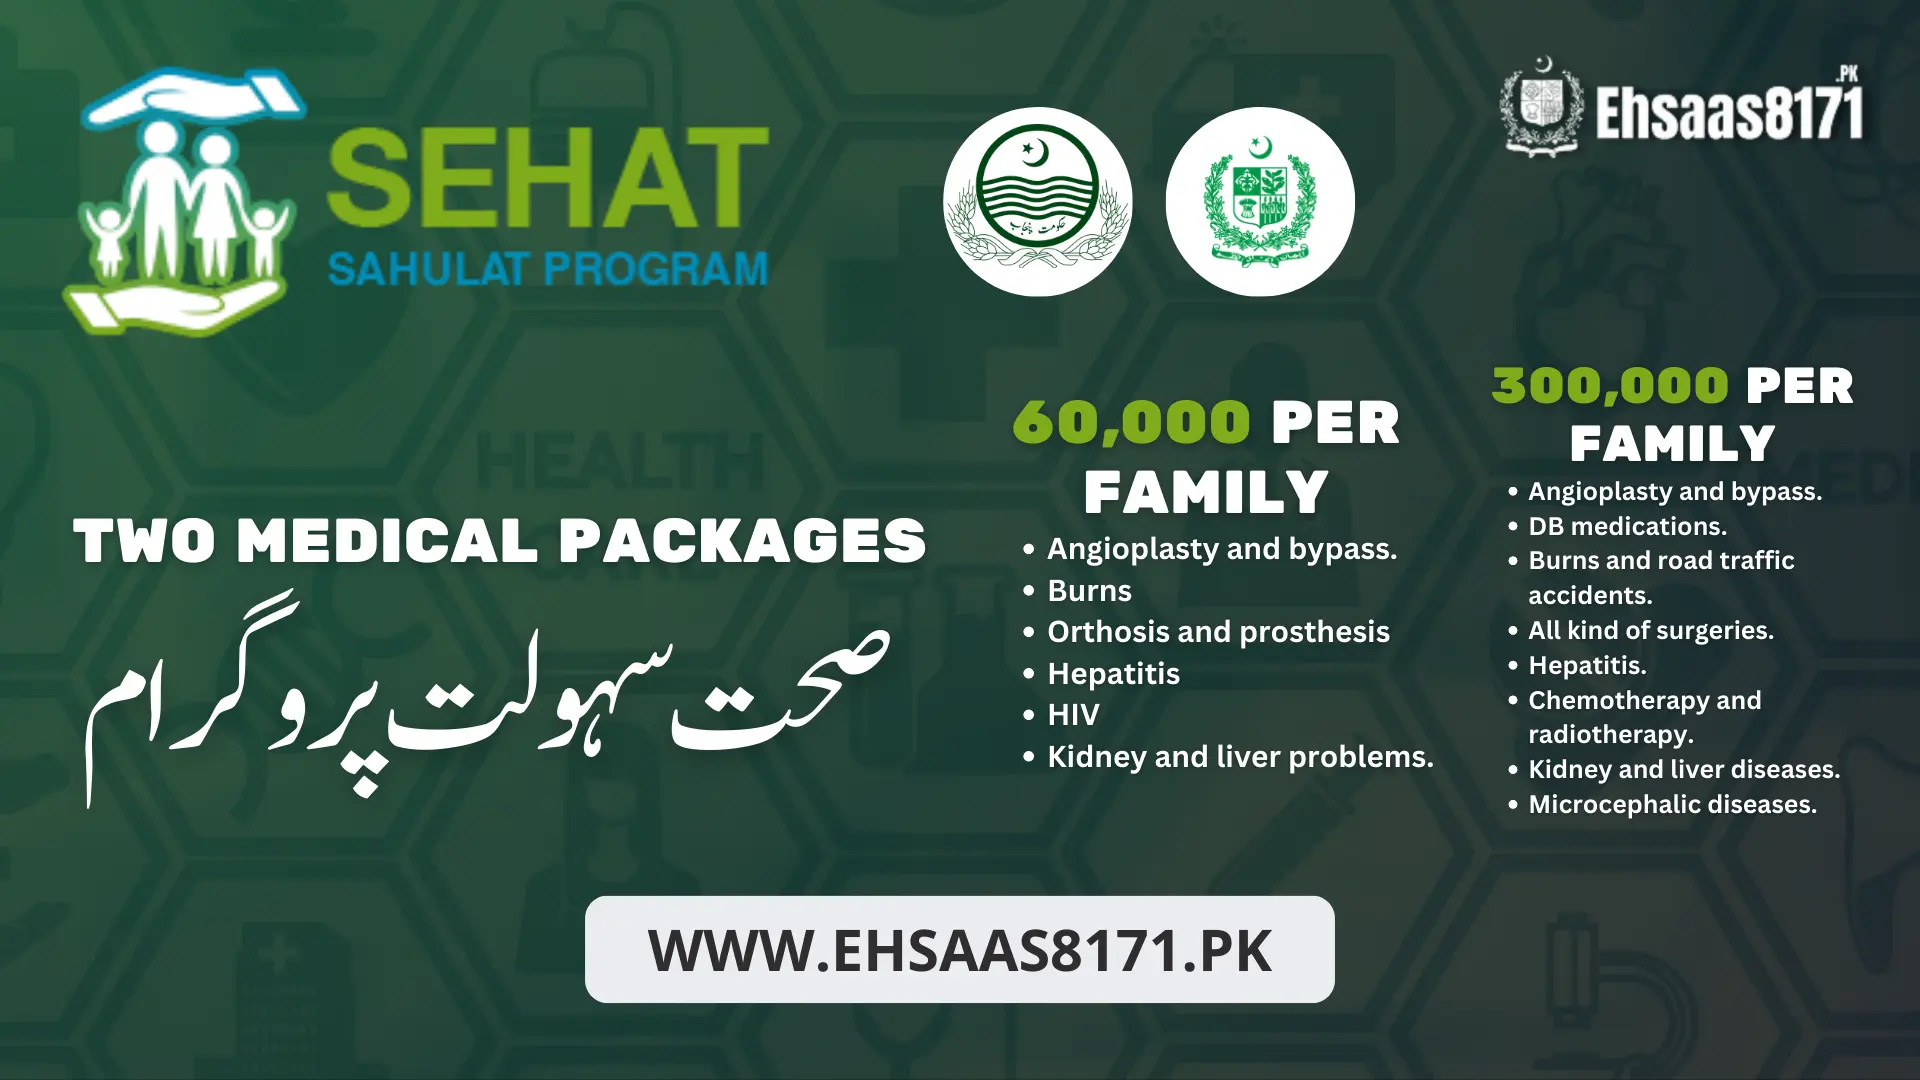 Sehat sahulat program two medical packages